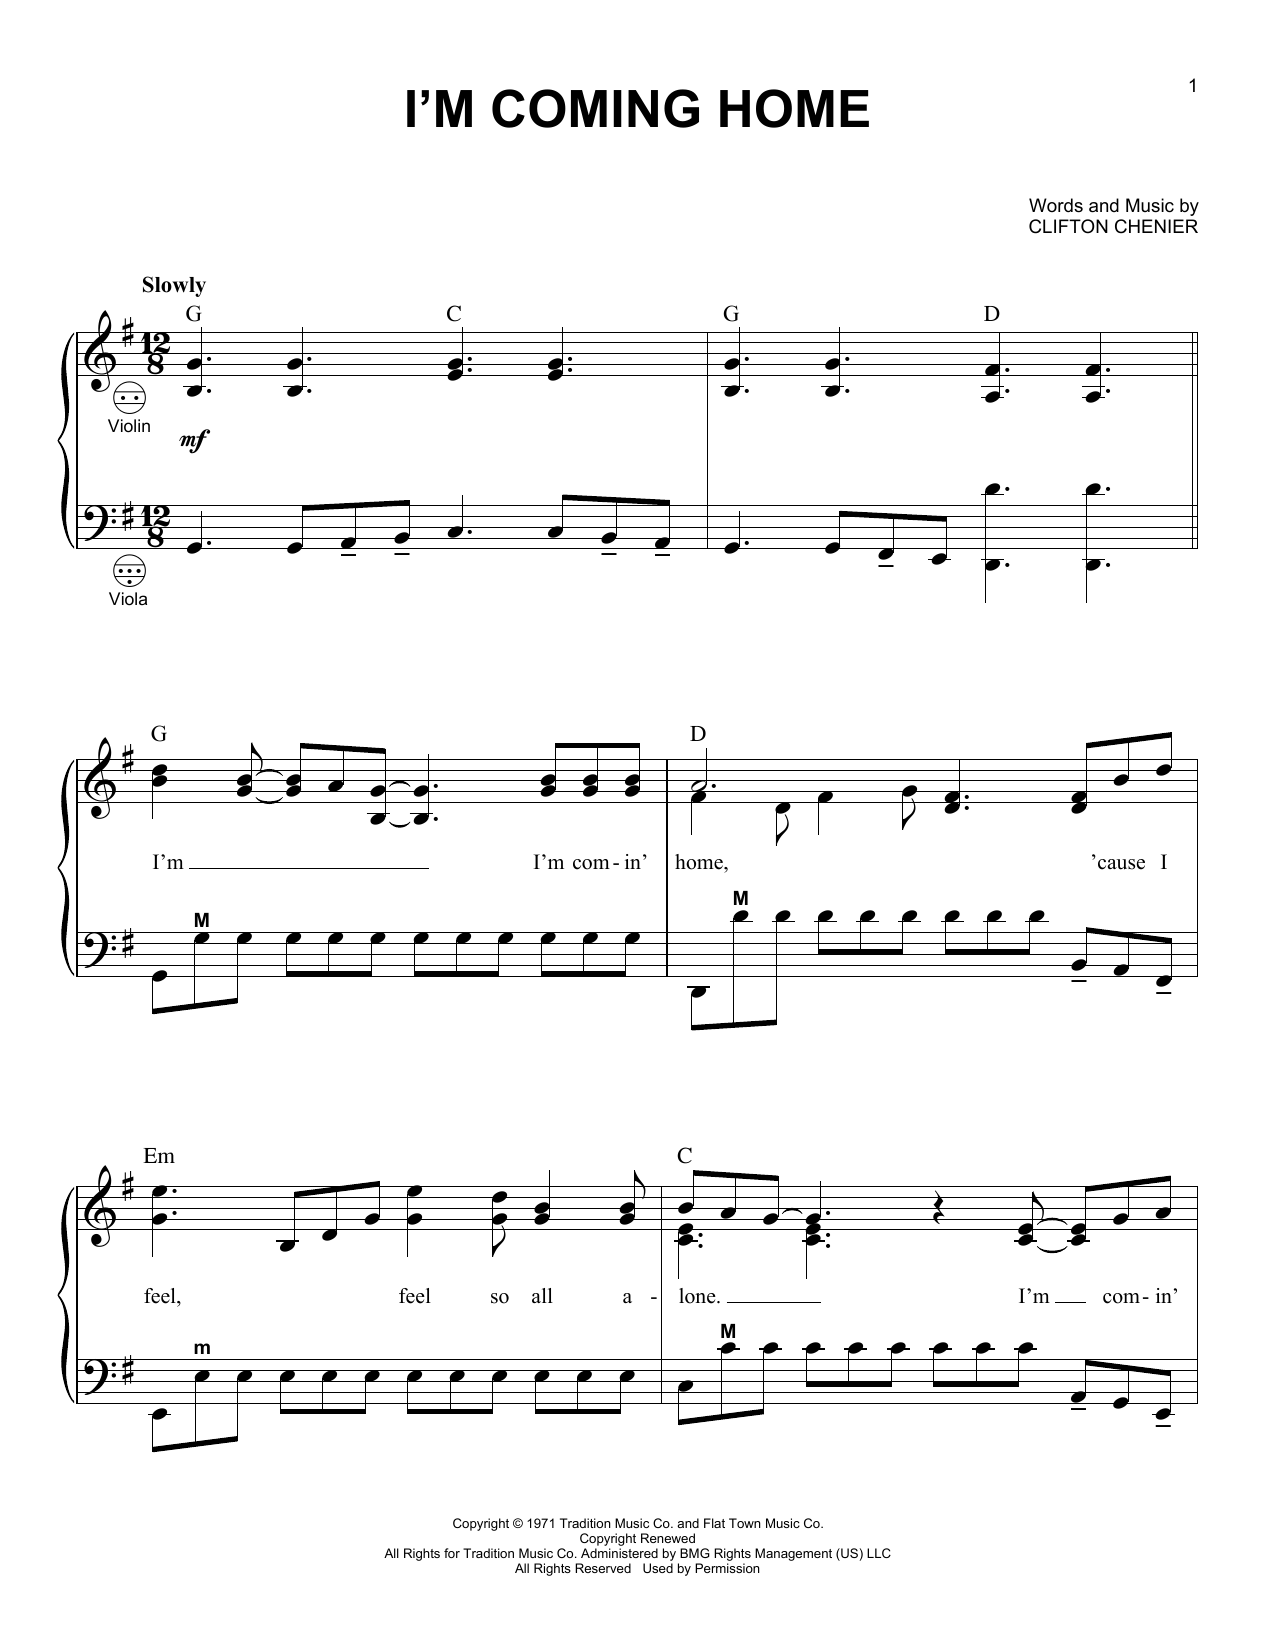 Clifton Chenier I'm Coming Home sheet music notes and chords. Download Printable PDF.